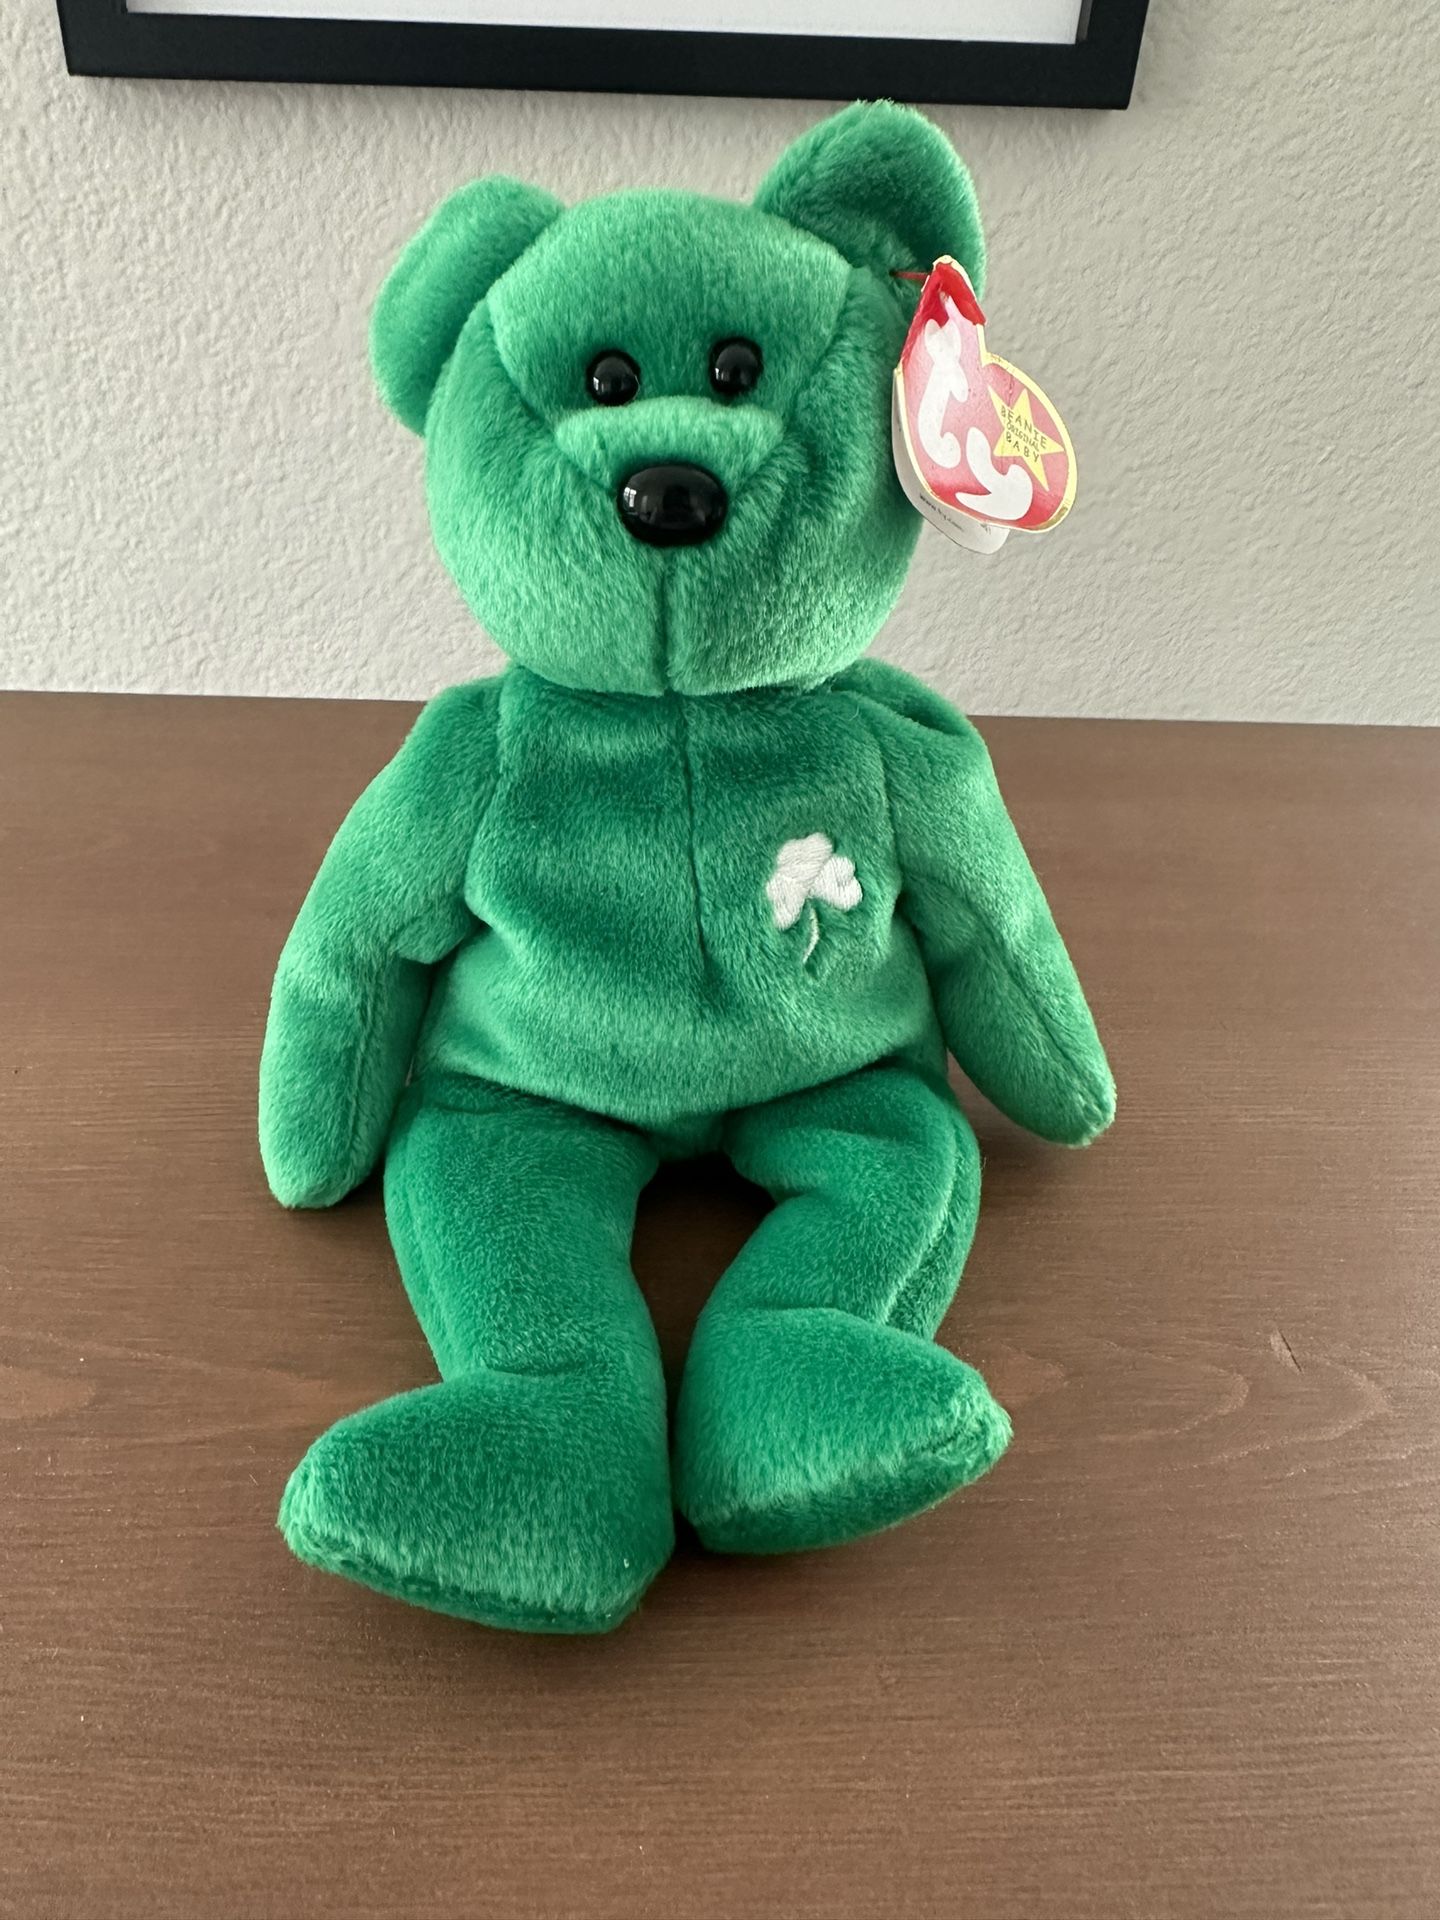 Collectible TY Beanie Baby